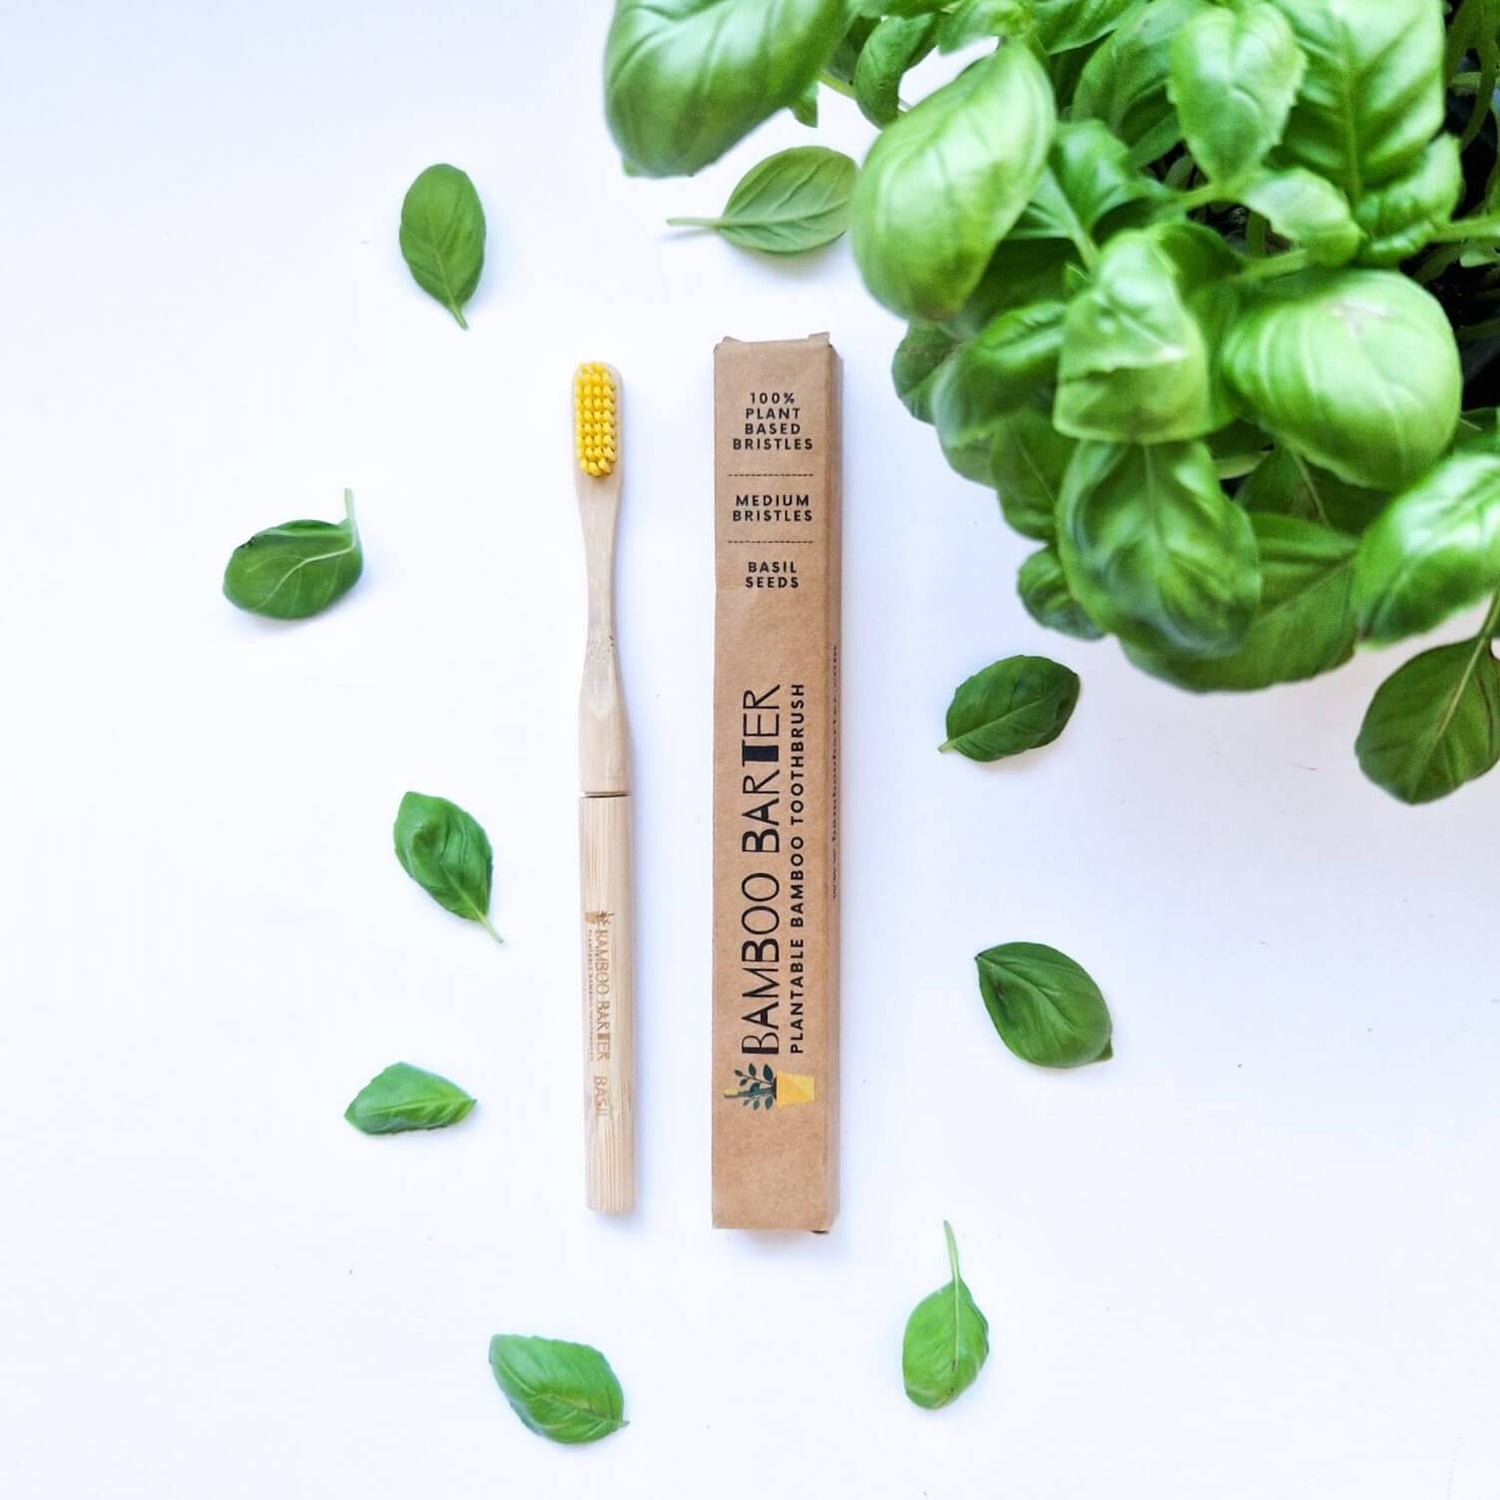 A bamboo toothbrush outside of the packaging with basil leaves and a basil plant.